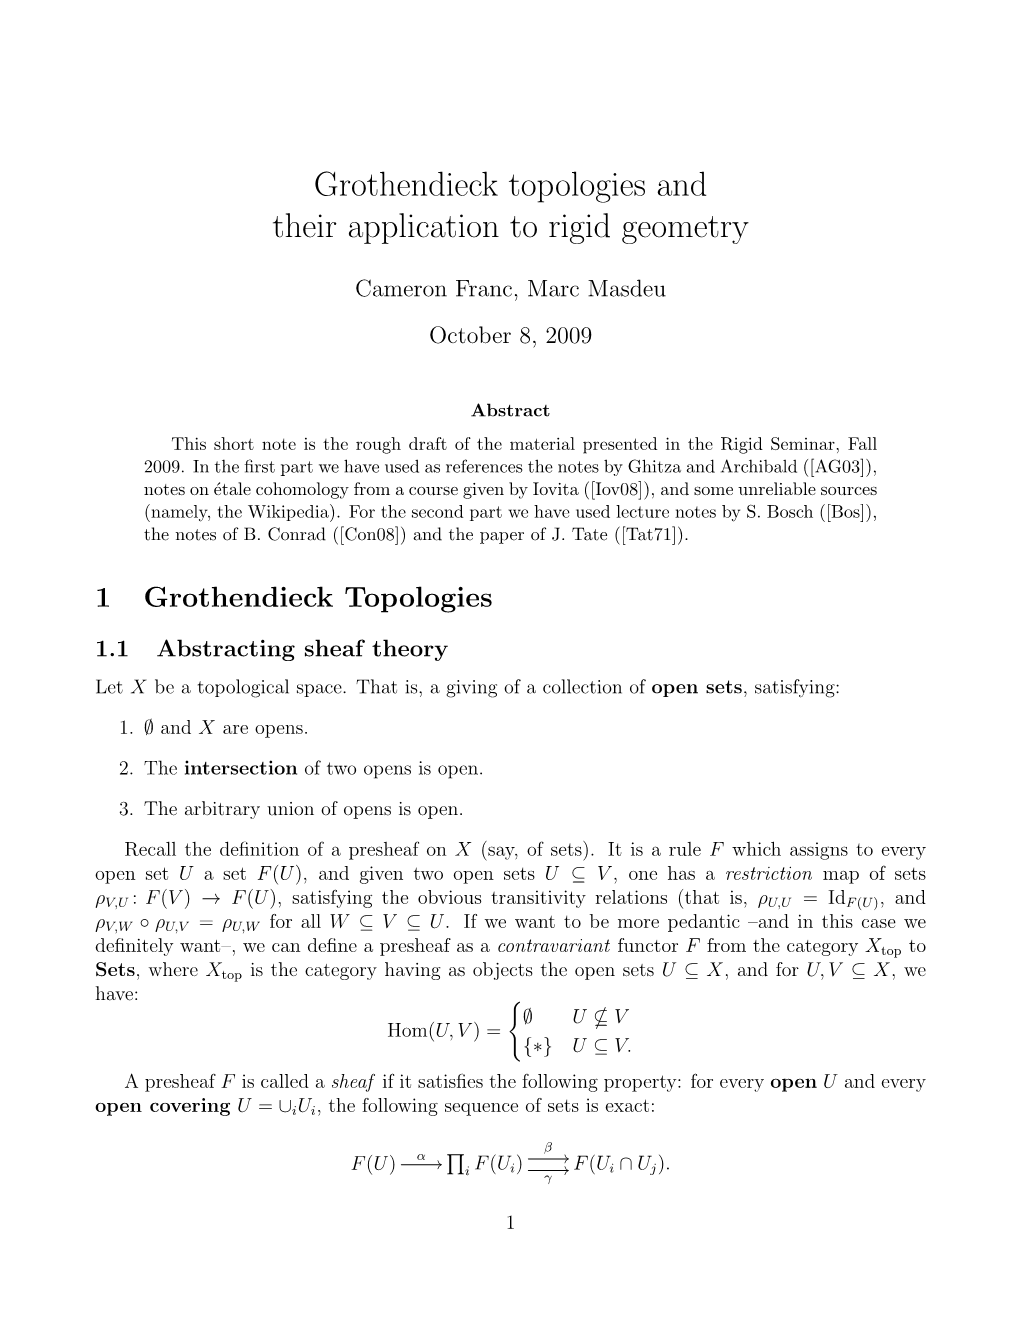 Grothendieck Topologies and Their Application to Rigid Geometry